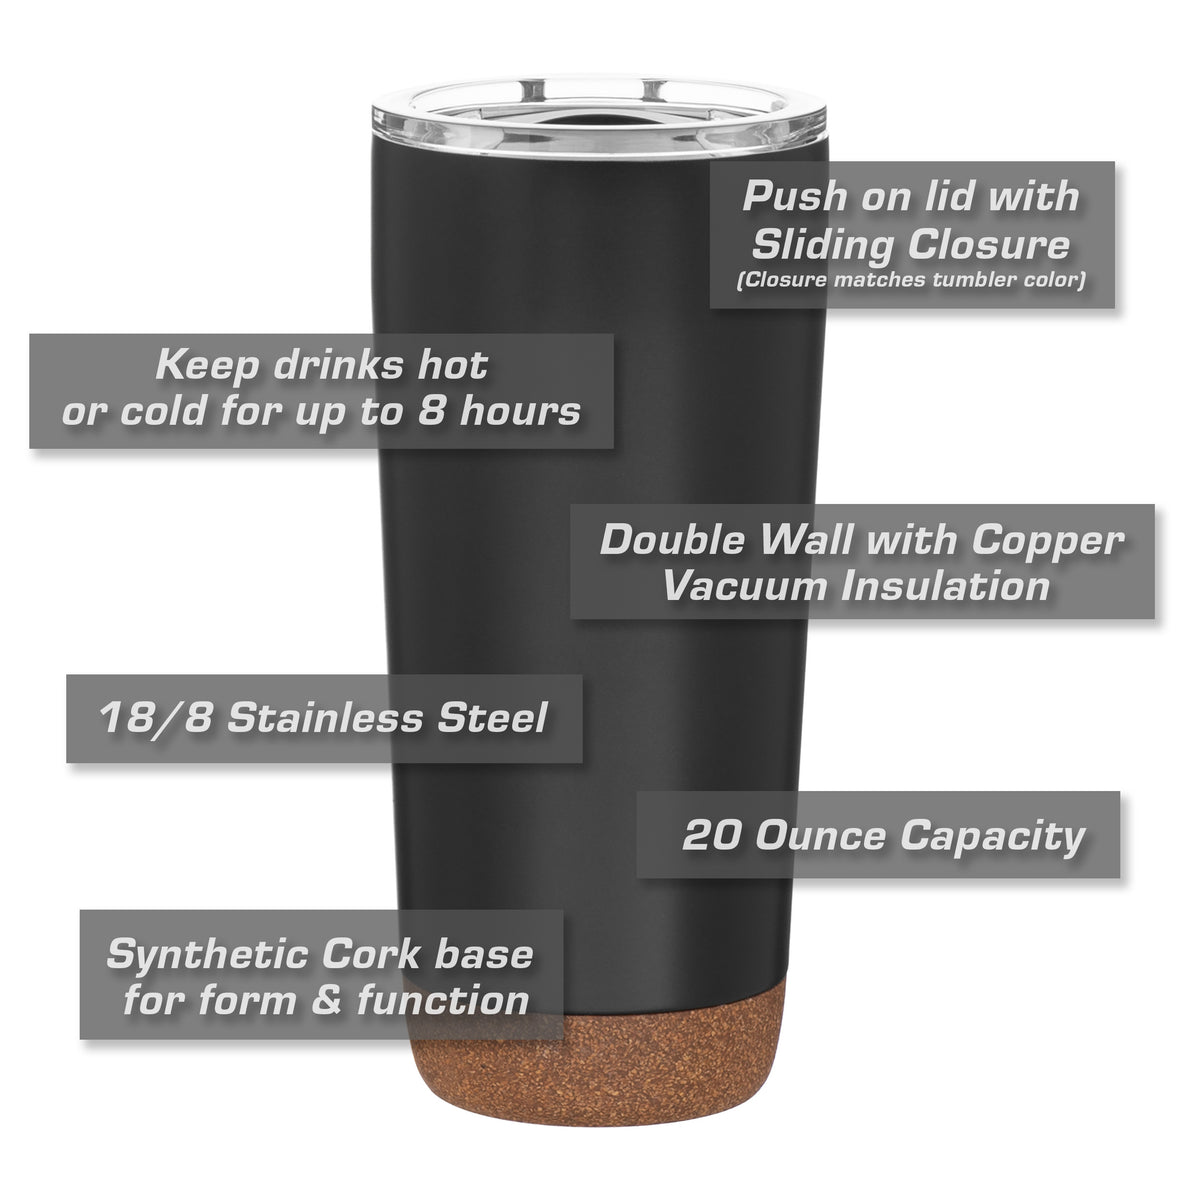 Porsche 917 Insulated Stainless Steel Coffee Tumbler - 20 oz